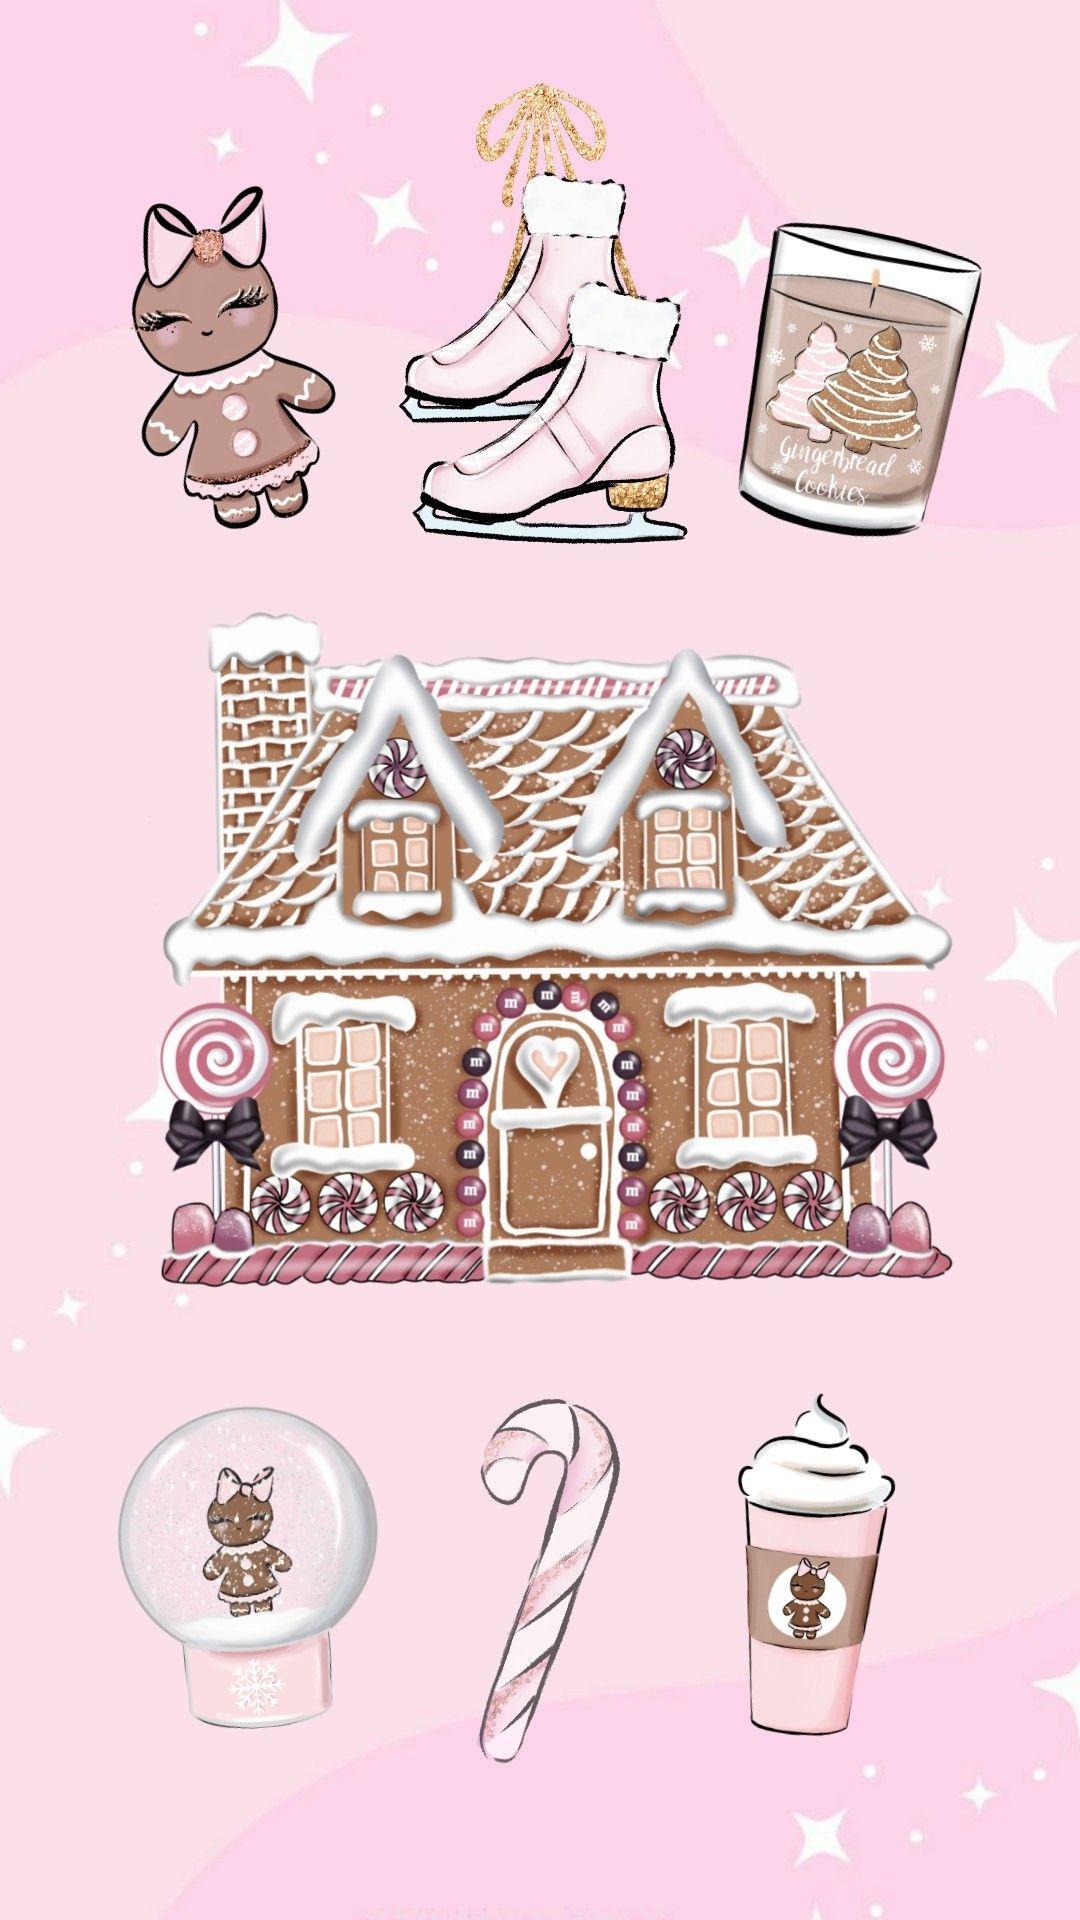 Pink Christmas Wallpaper Background